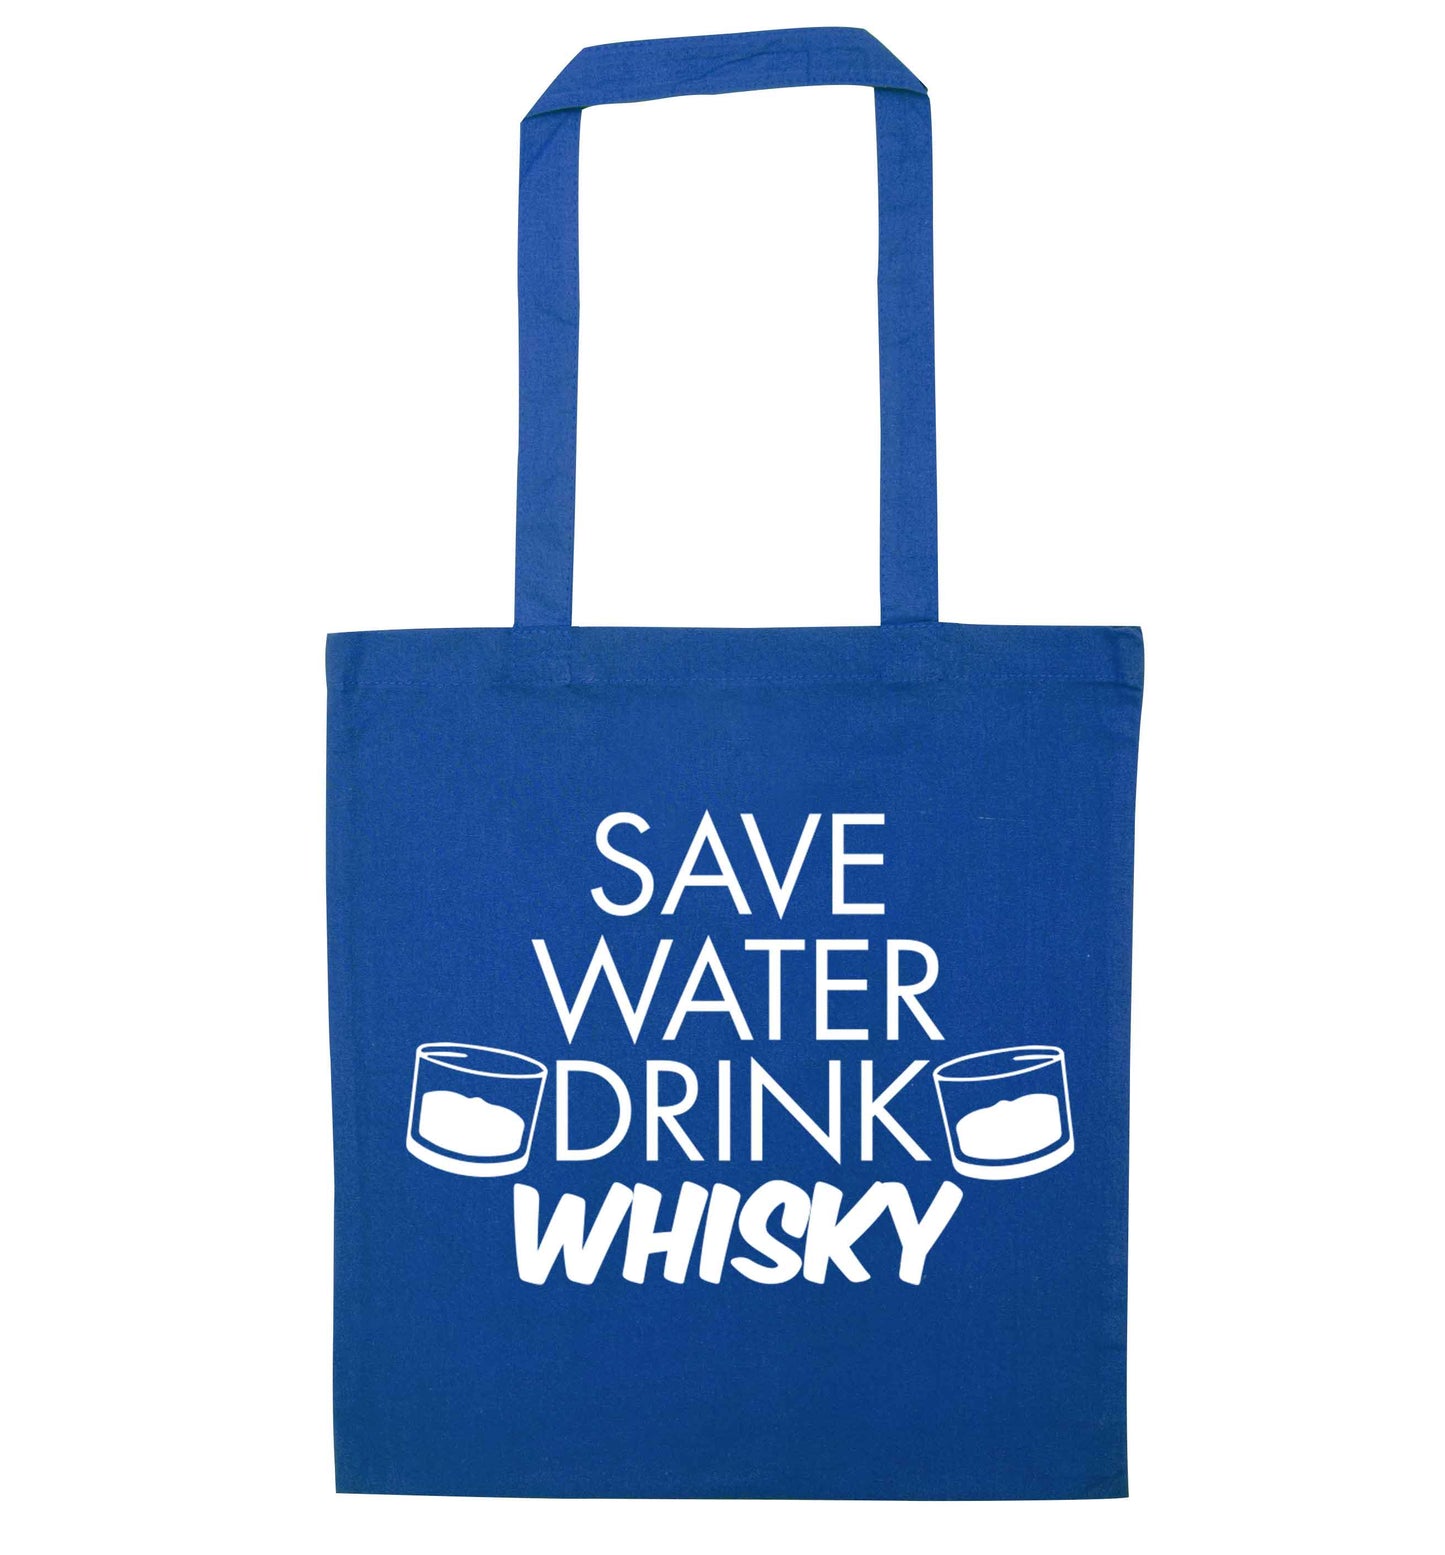 Save water drink whisky blue tote bag